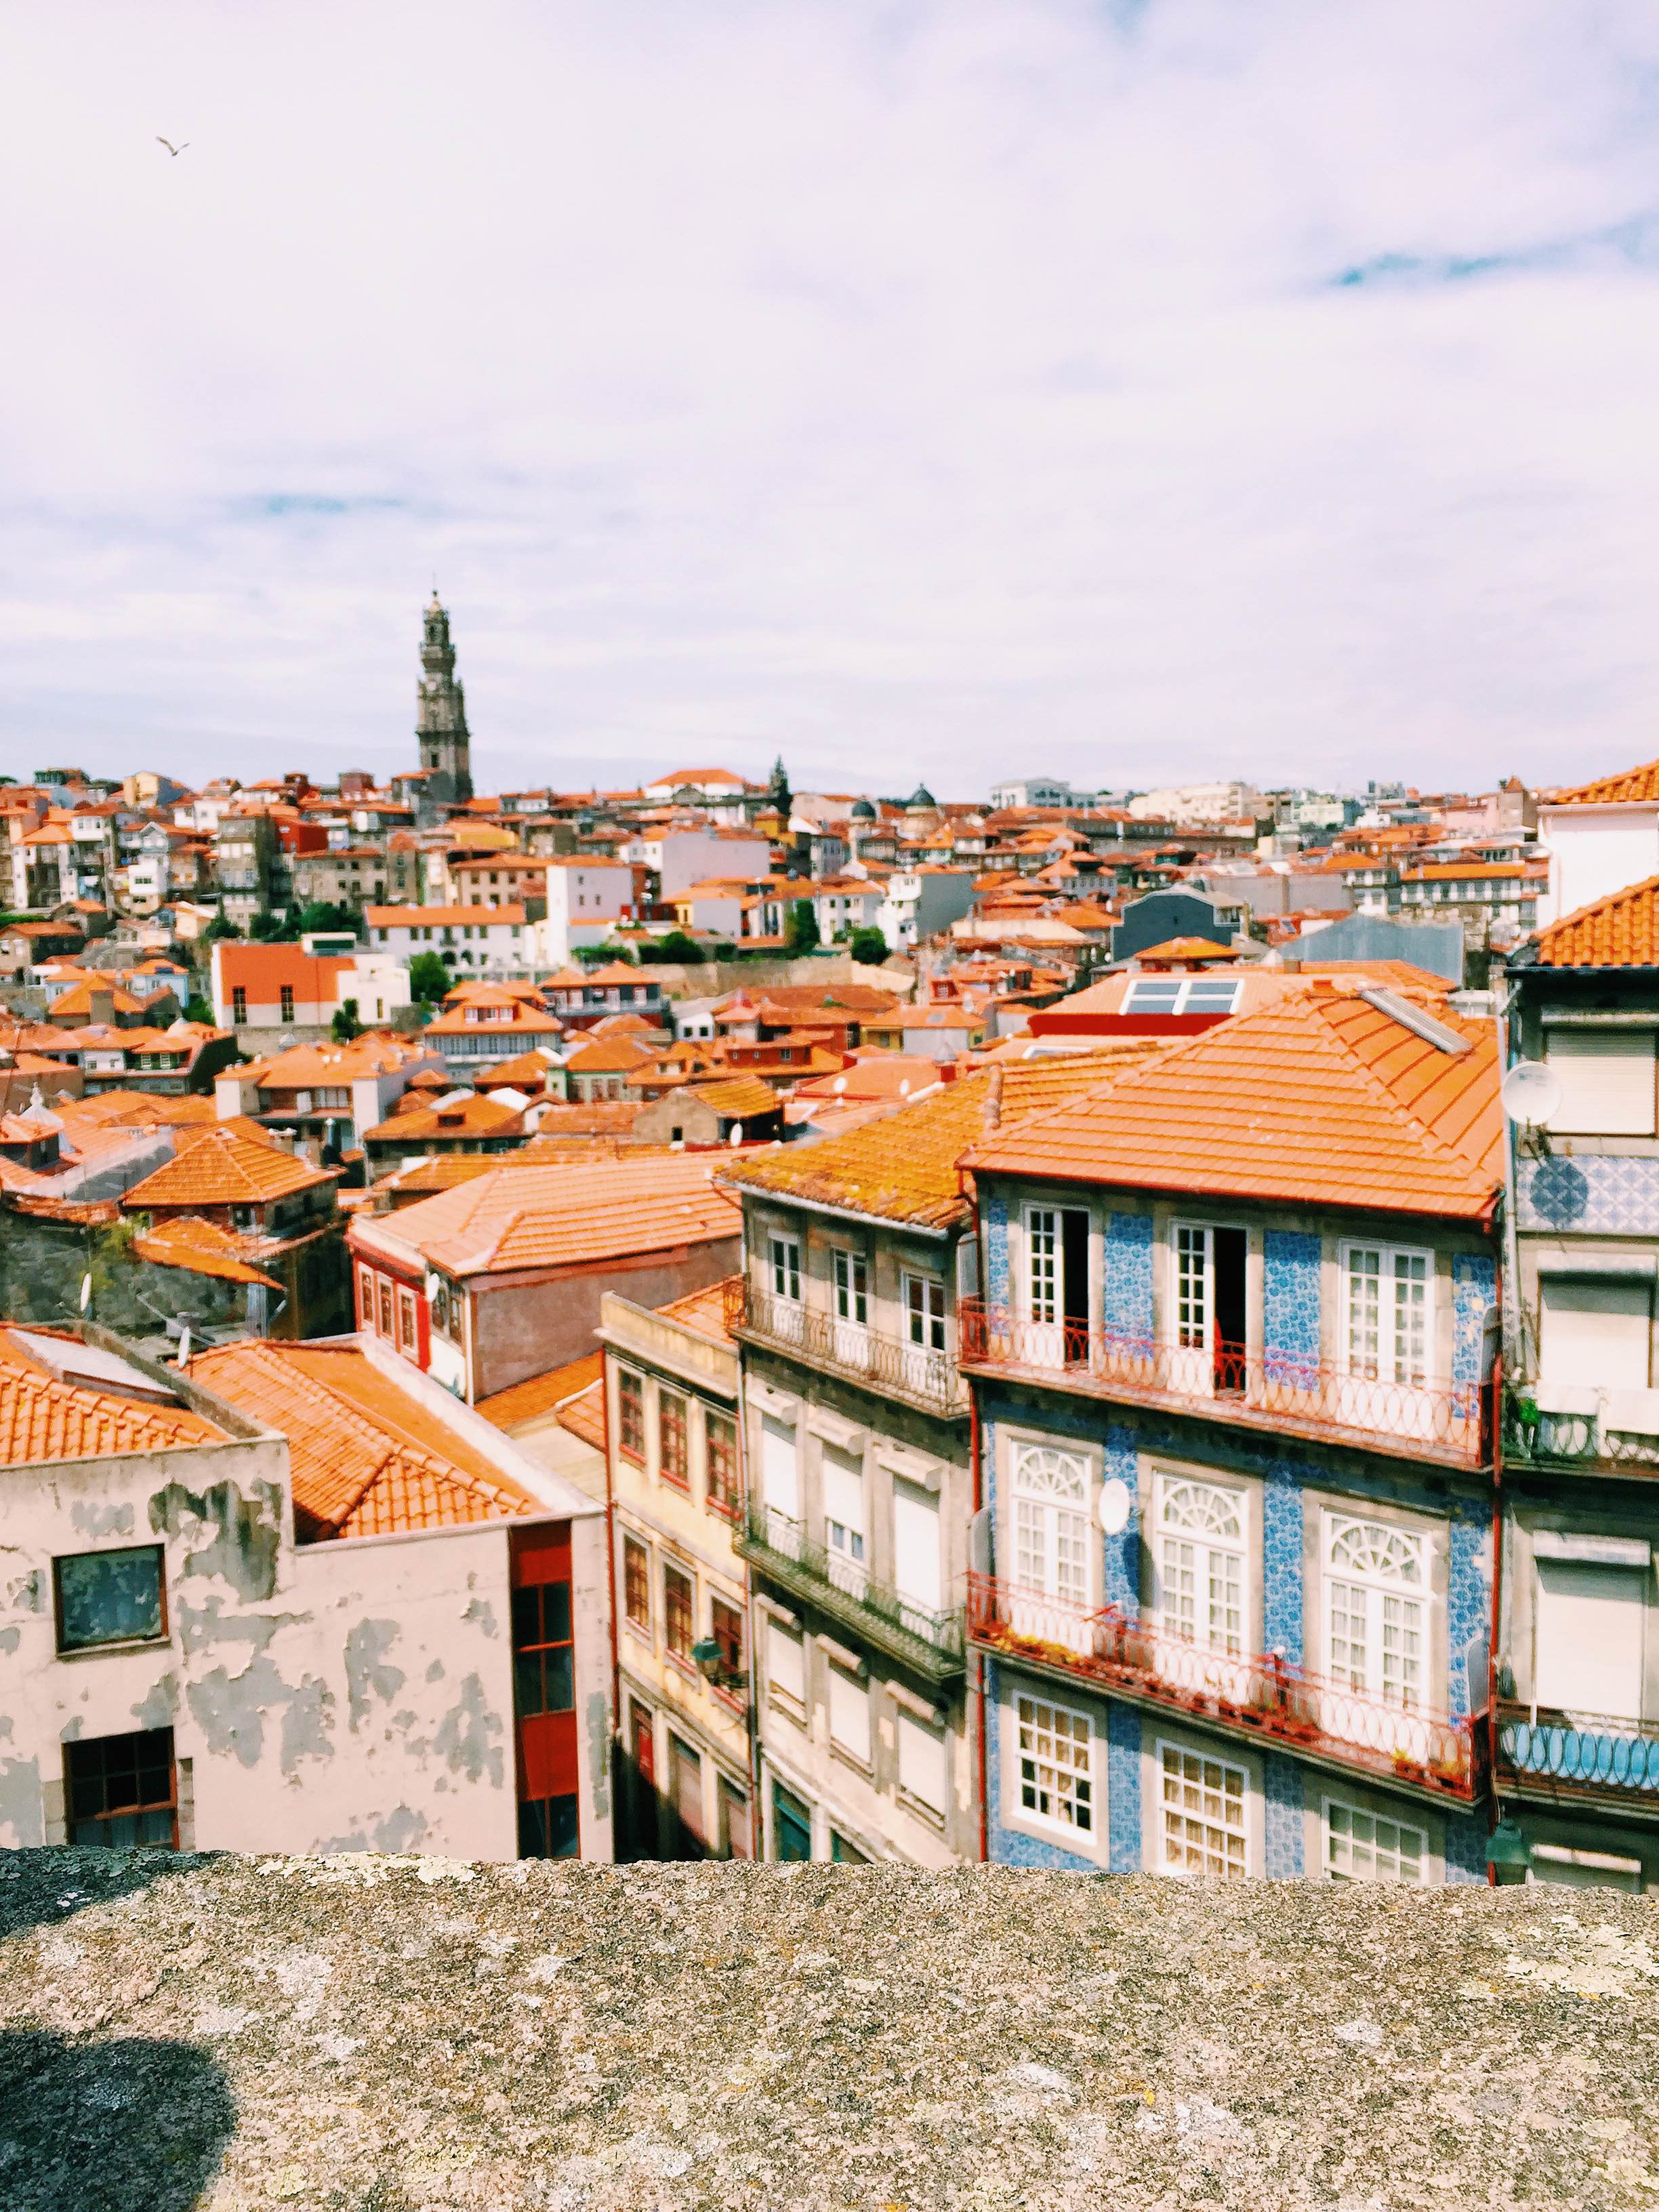 2 weeks in portugal - porto - panorama